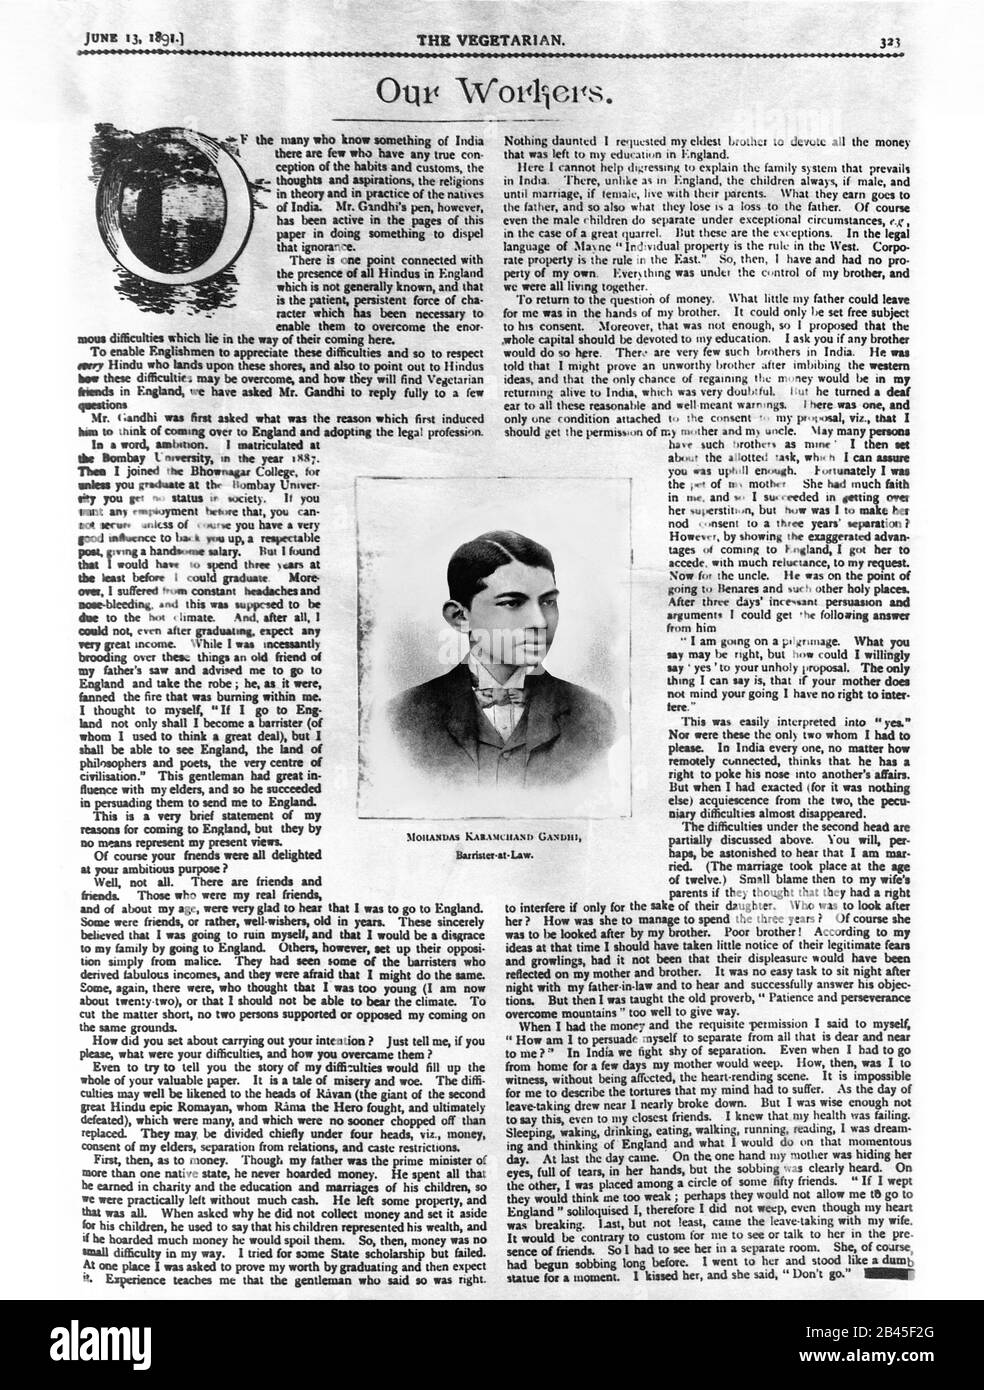 Mahatma Gandhi interview published by The Vegetarian newspaper, London, England, United Kingdom, UK, 13 June 1891, old vintage 1900s picture Stock Photo